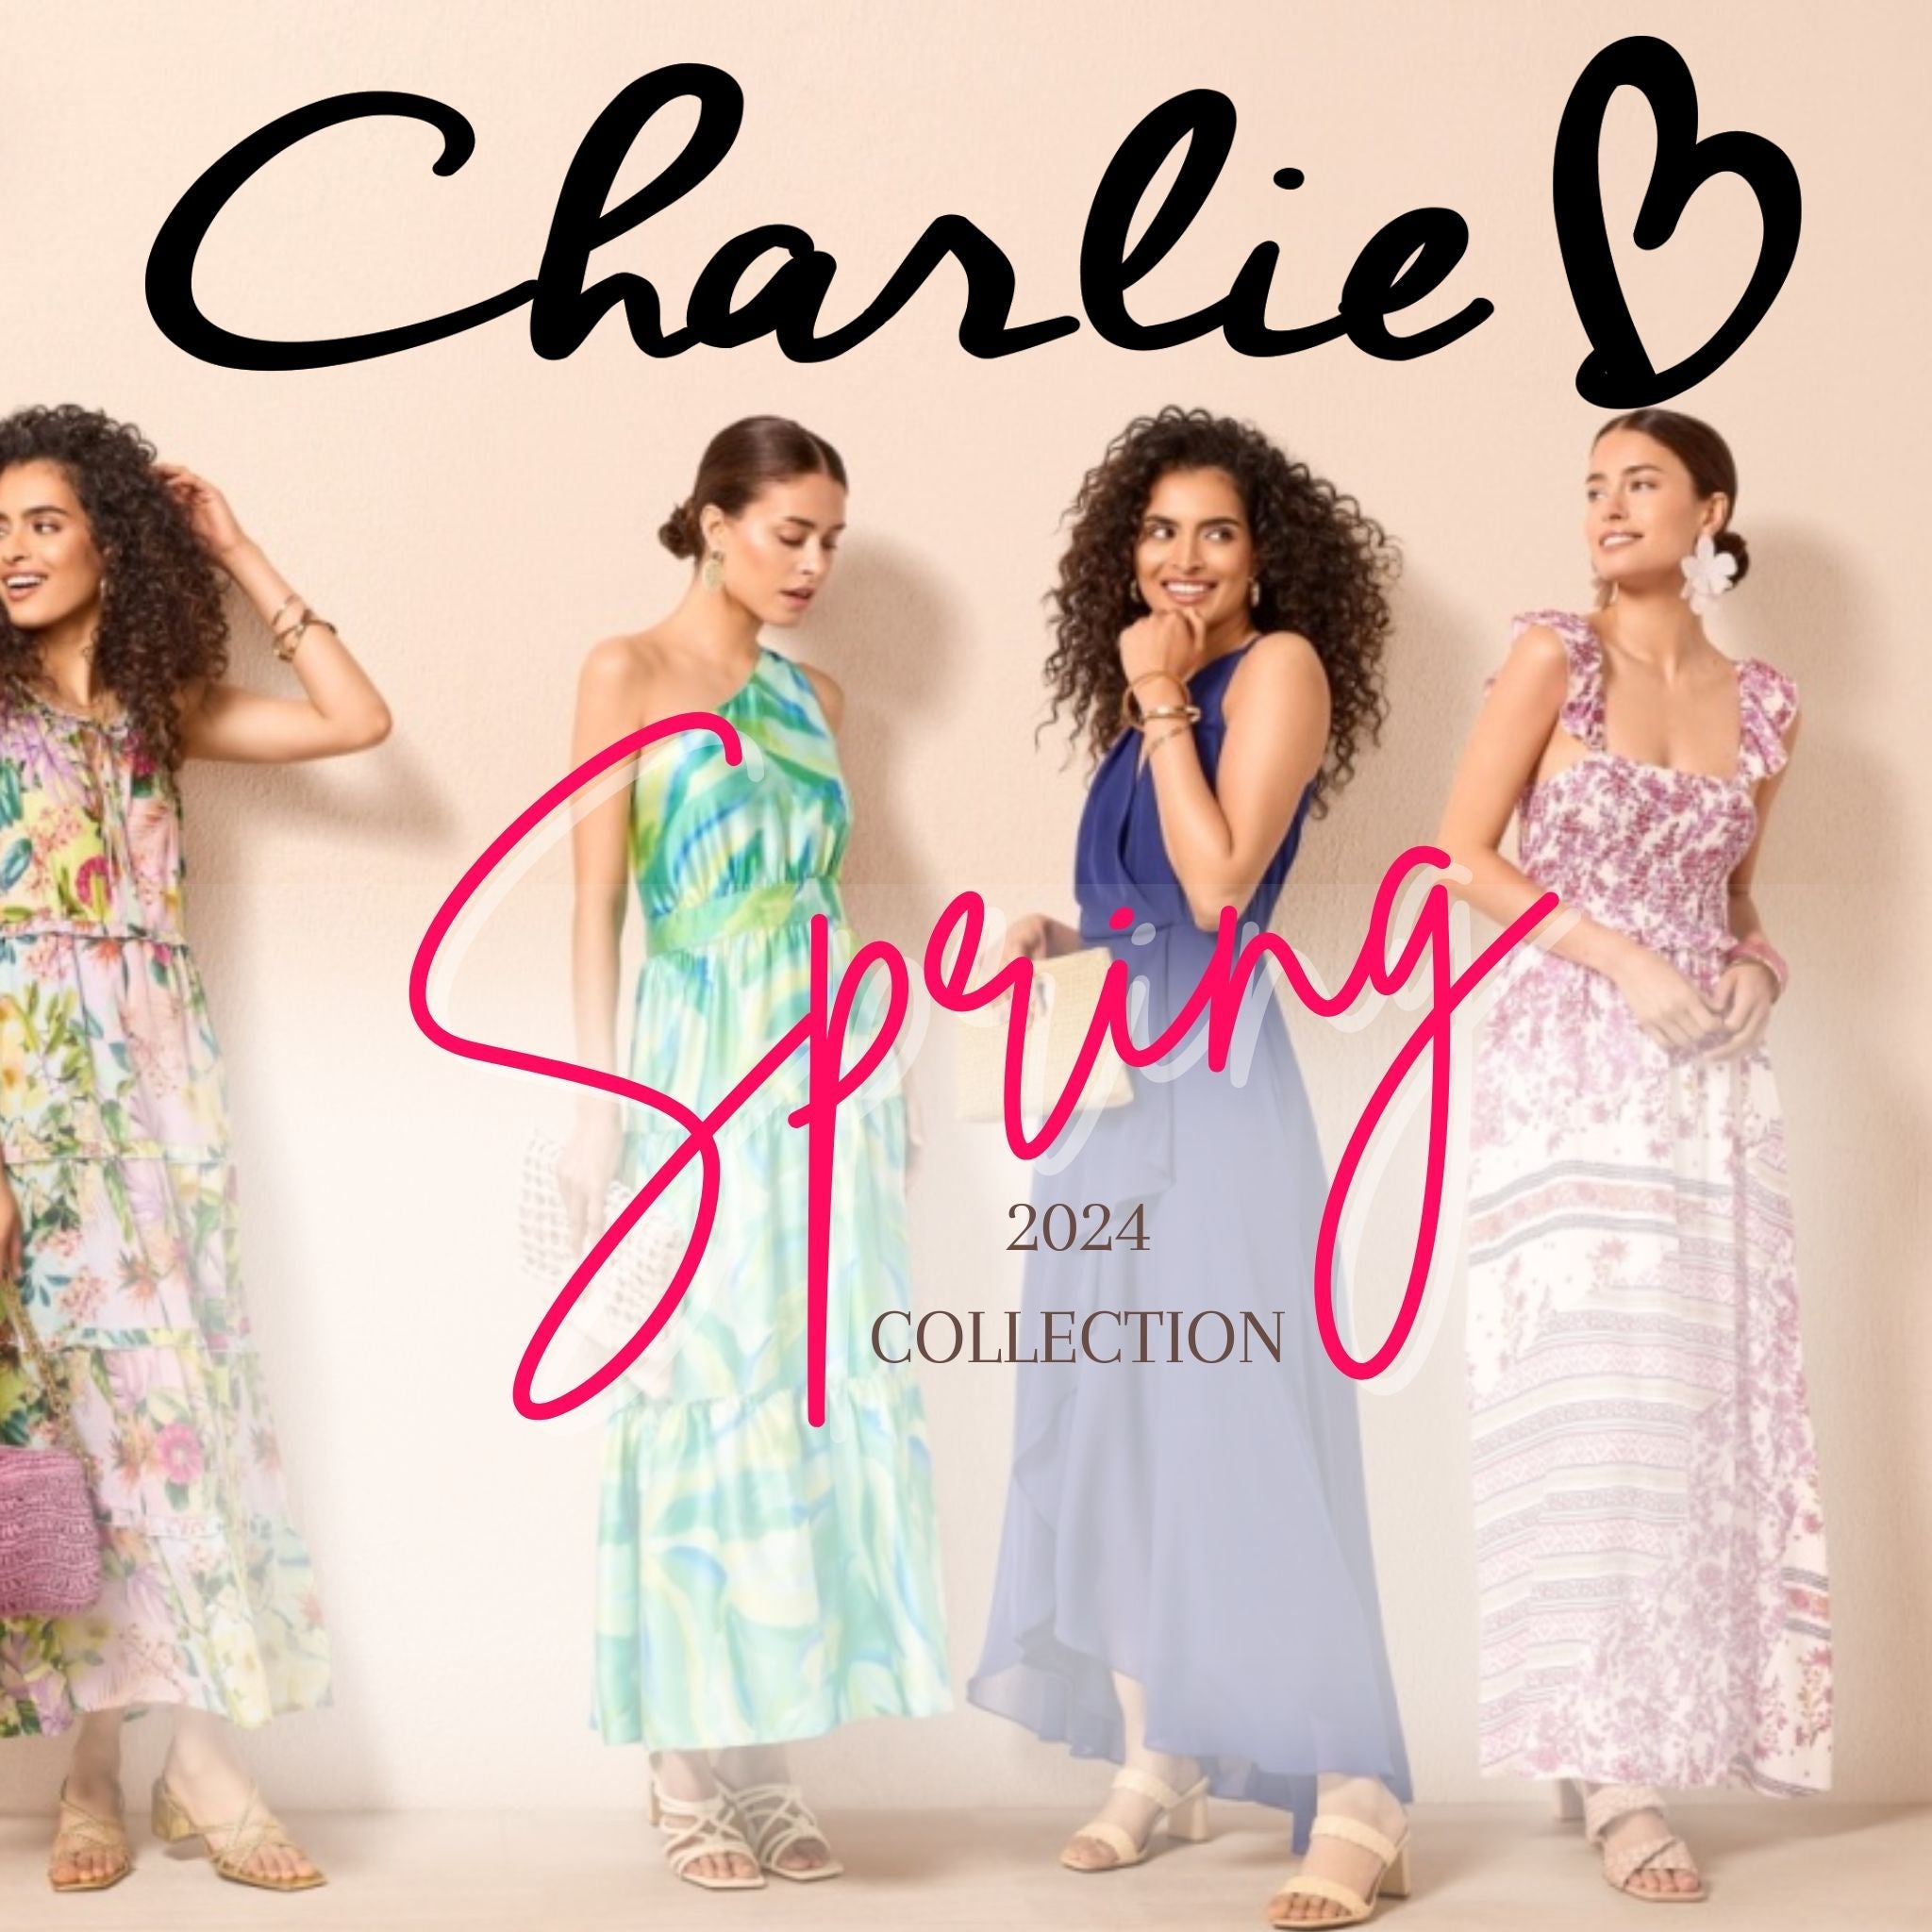 Charlie B Collection